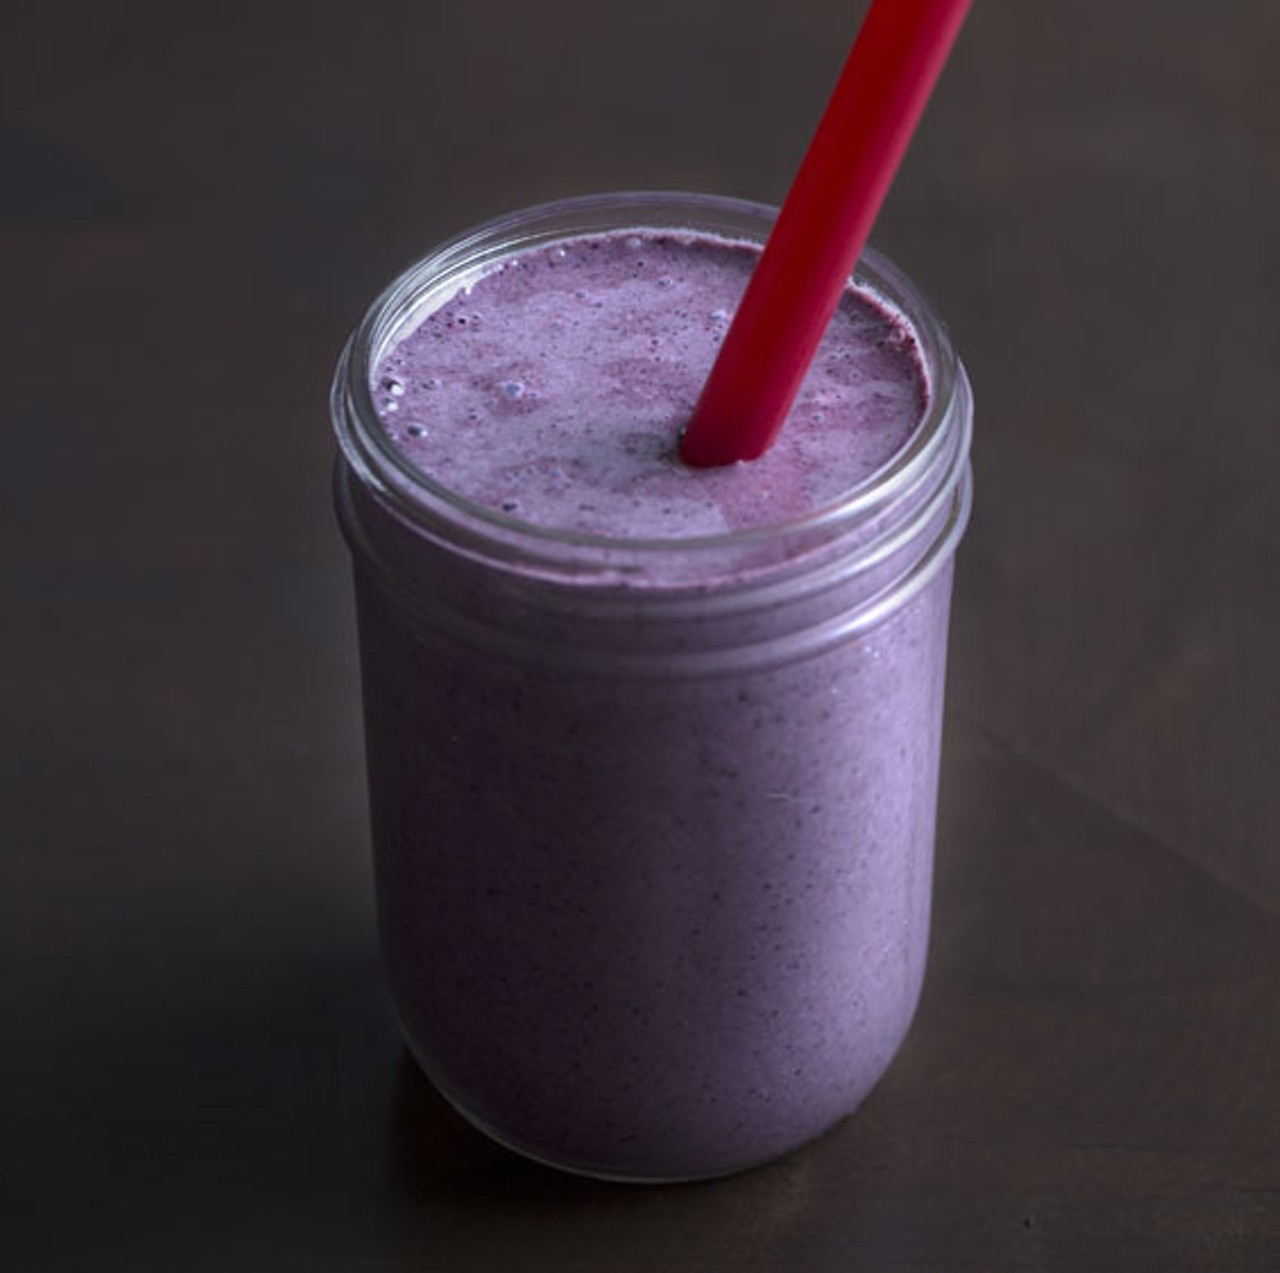 The "Berry Bright" smoothie.